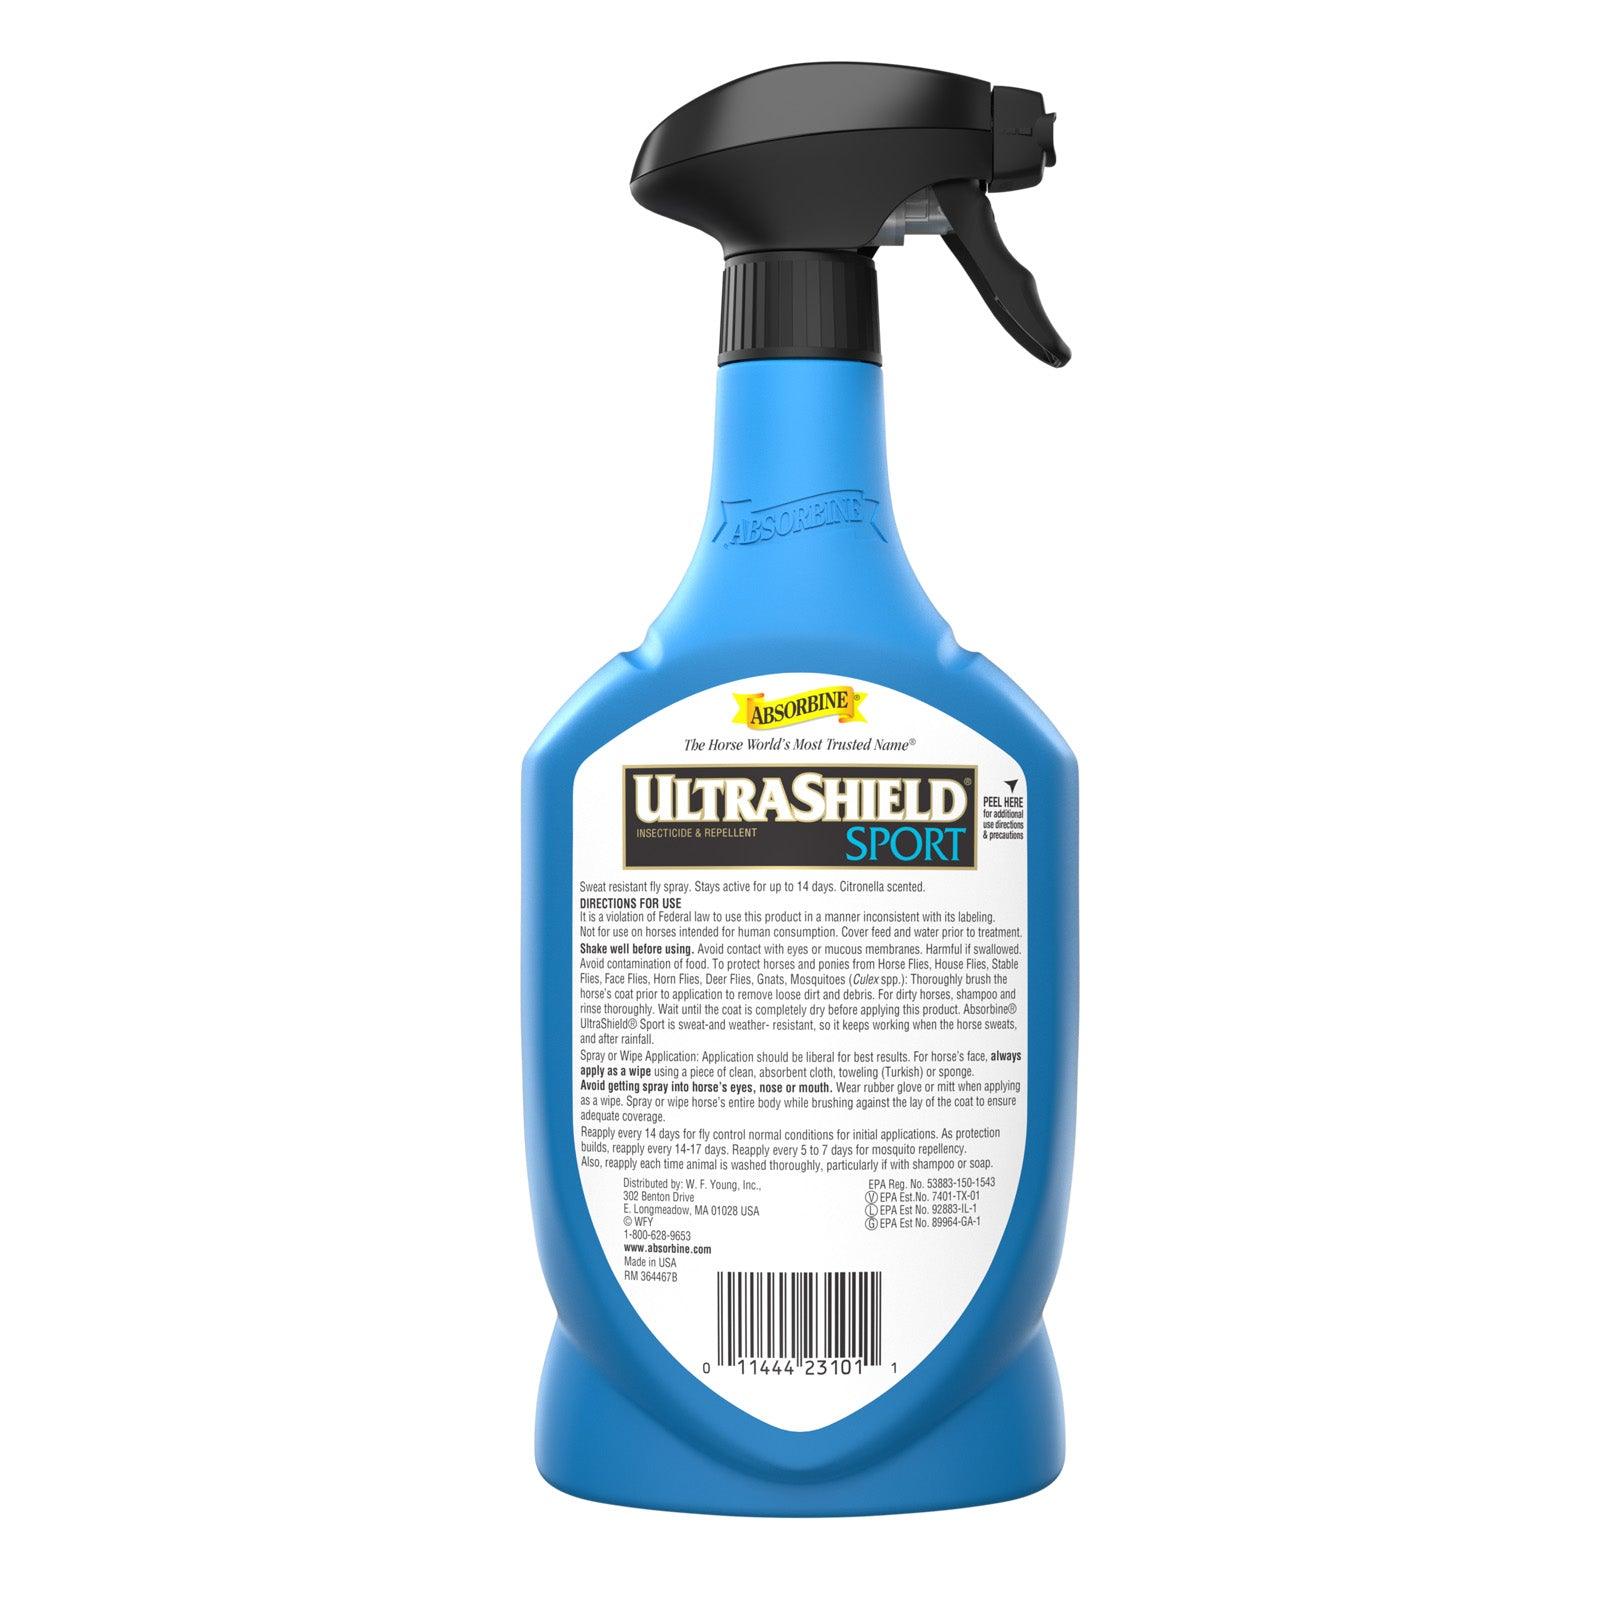 UltraShield® Sport Insecticide & Repellent Fly Control absorbine   